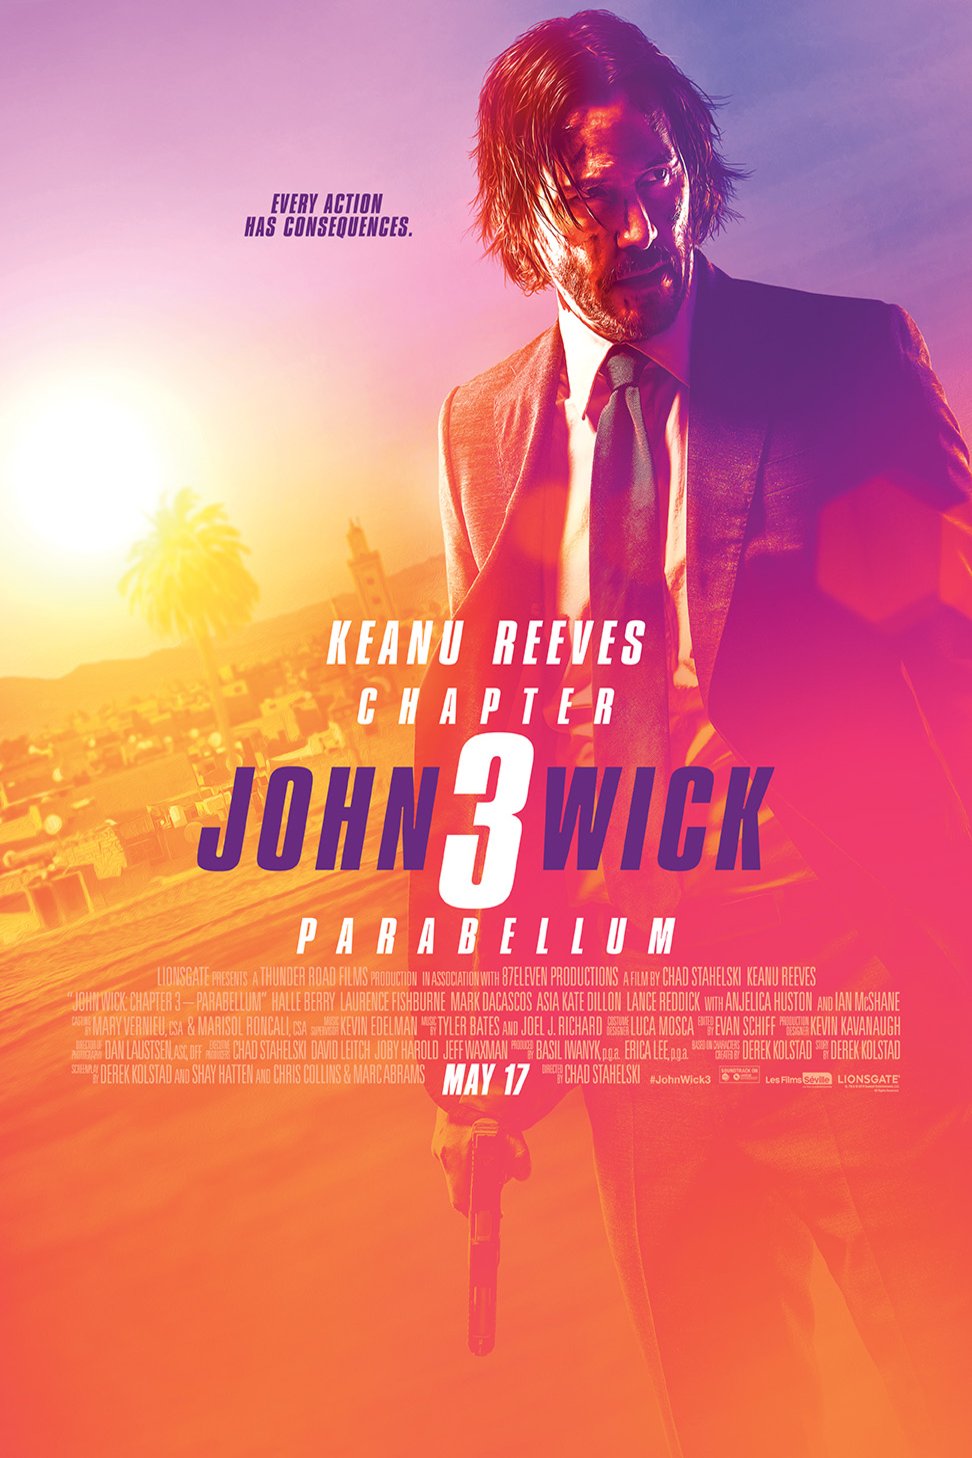 Poster of the movie John Wick: Chapter 3 - Parabellum